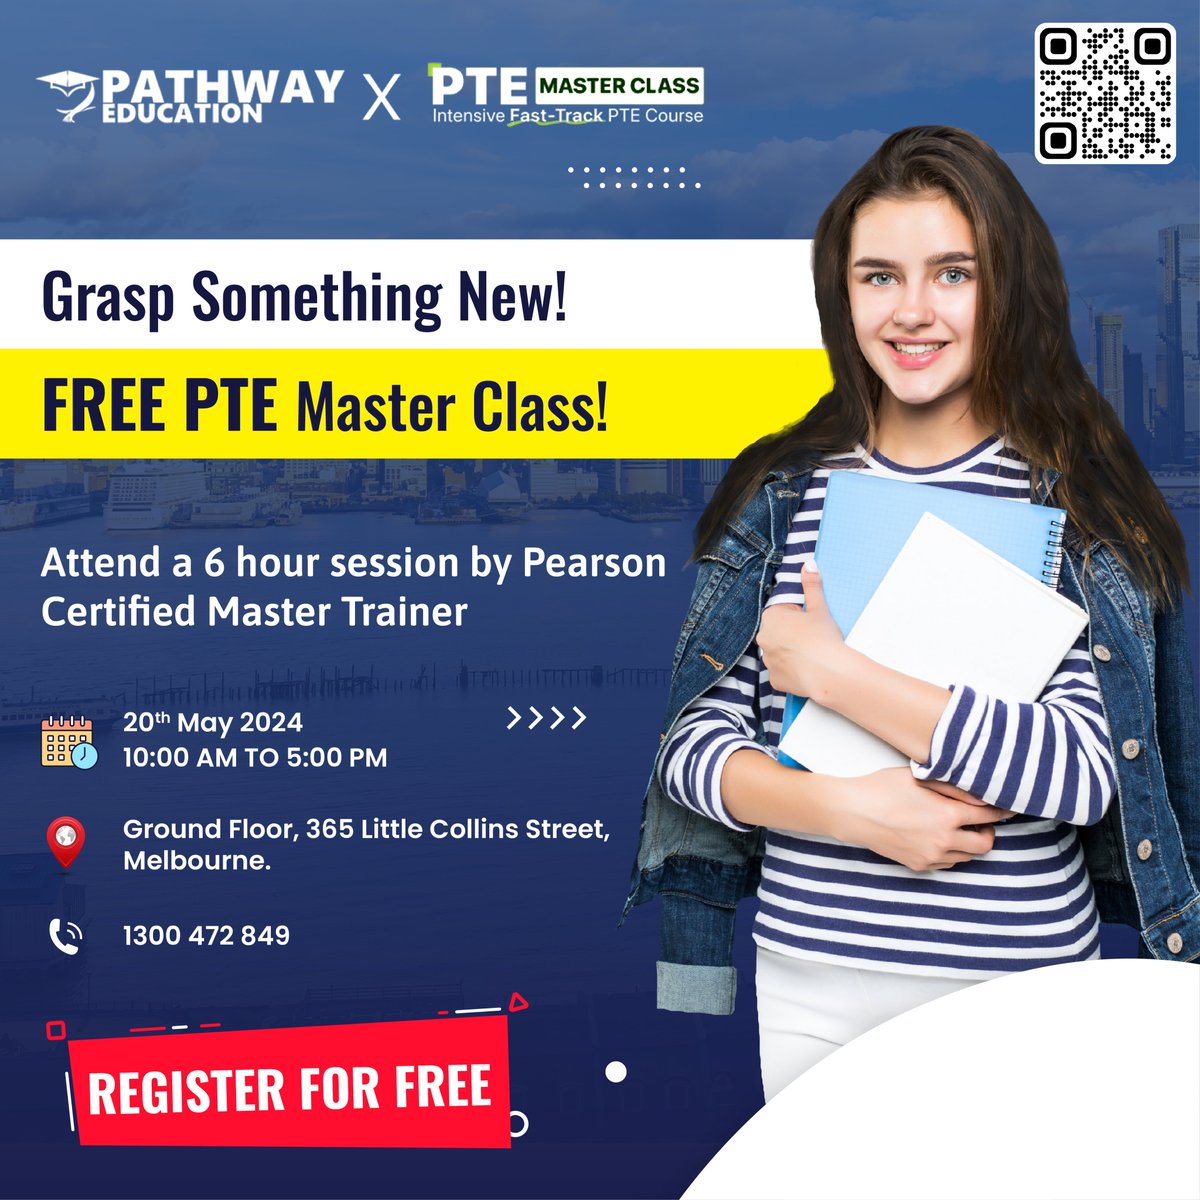 Grasp something new!💁💁‍♀️
Free PTE Master Class on 20th May! 
Registration Link: pte.pathwayeducation.com.au

#pte #masterclass #ptetest #ptecoaching #pteexam #ptetips #pteonlinecoaching #pteonline #ptepreparation #ptepractice #ptetutorials #ptescore #pteresult #pteclass #studyabroad